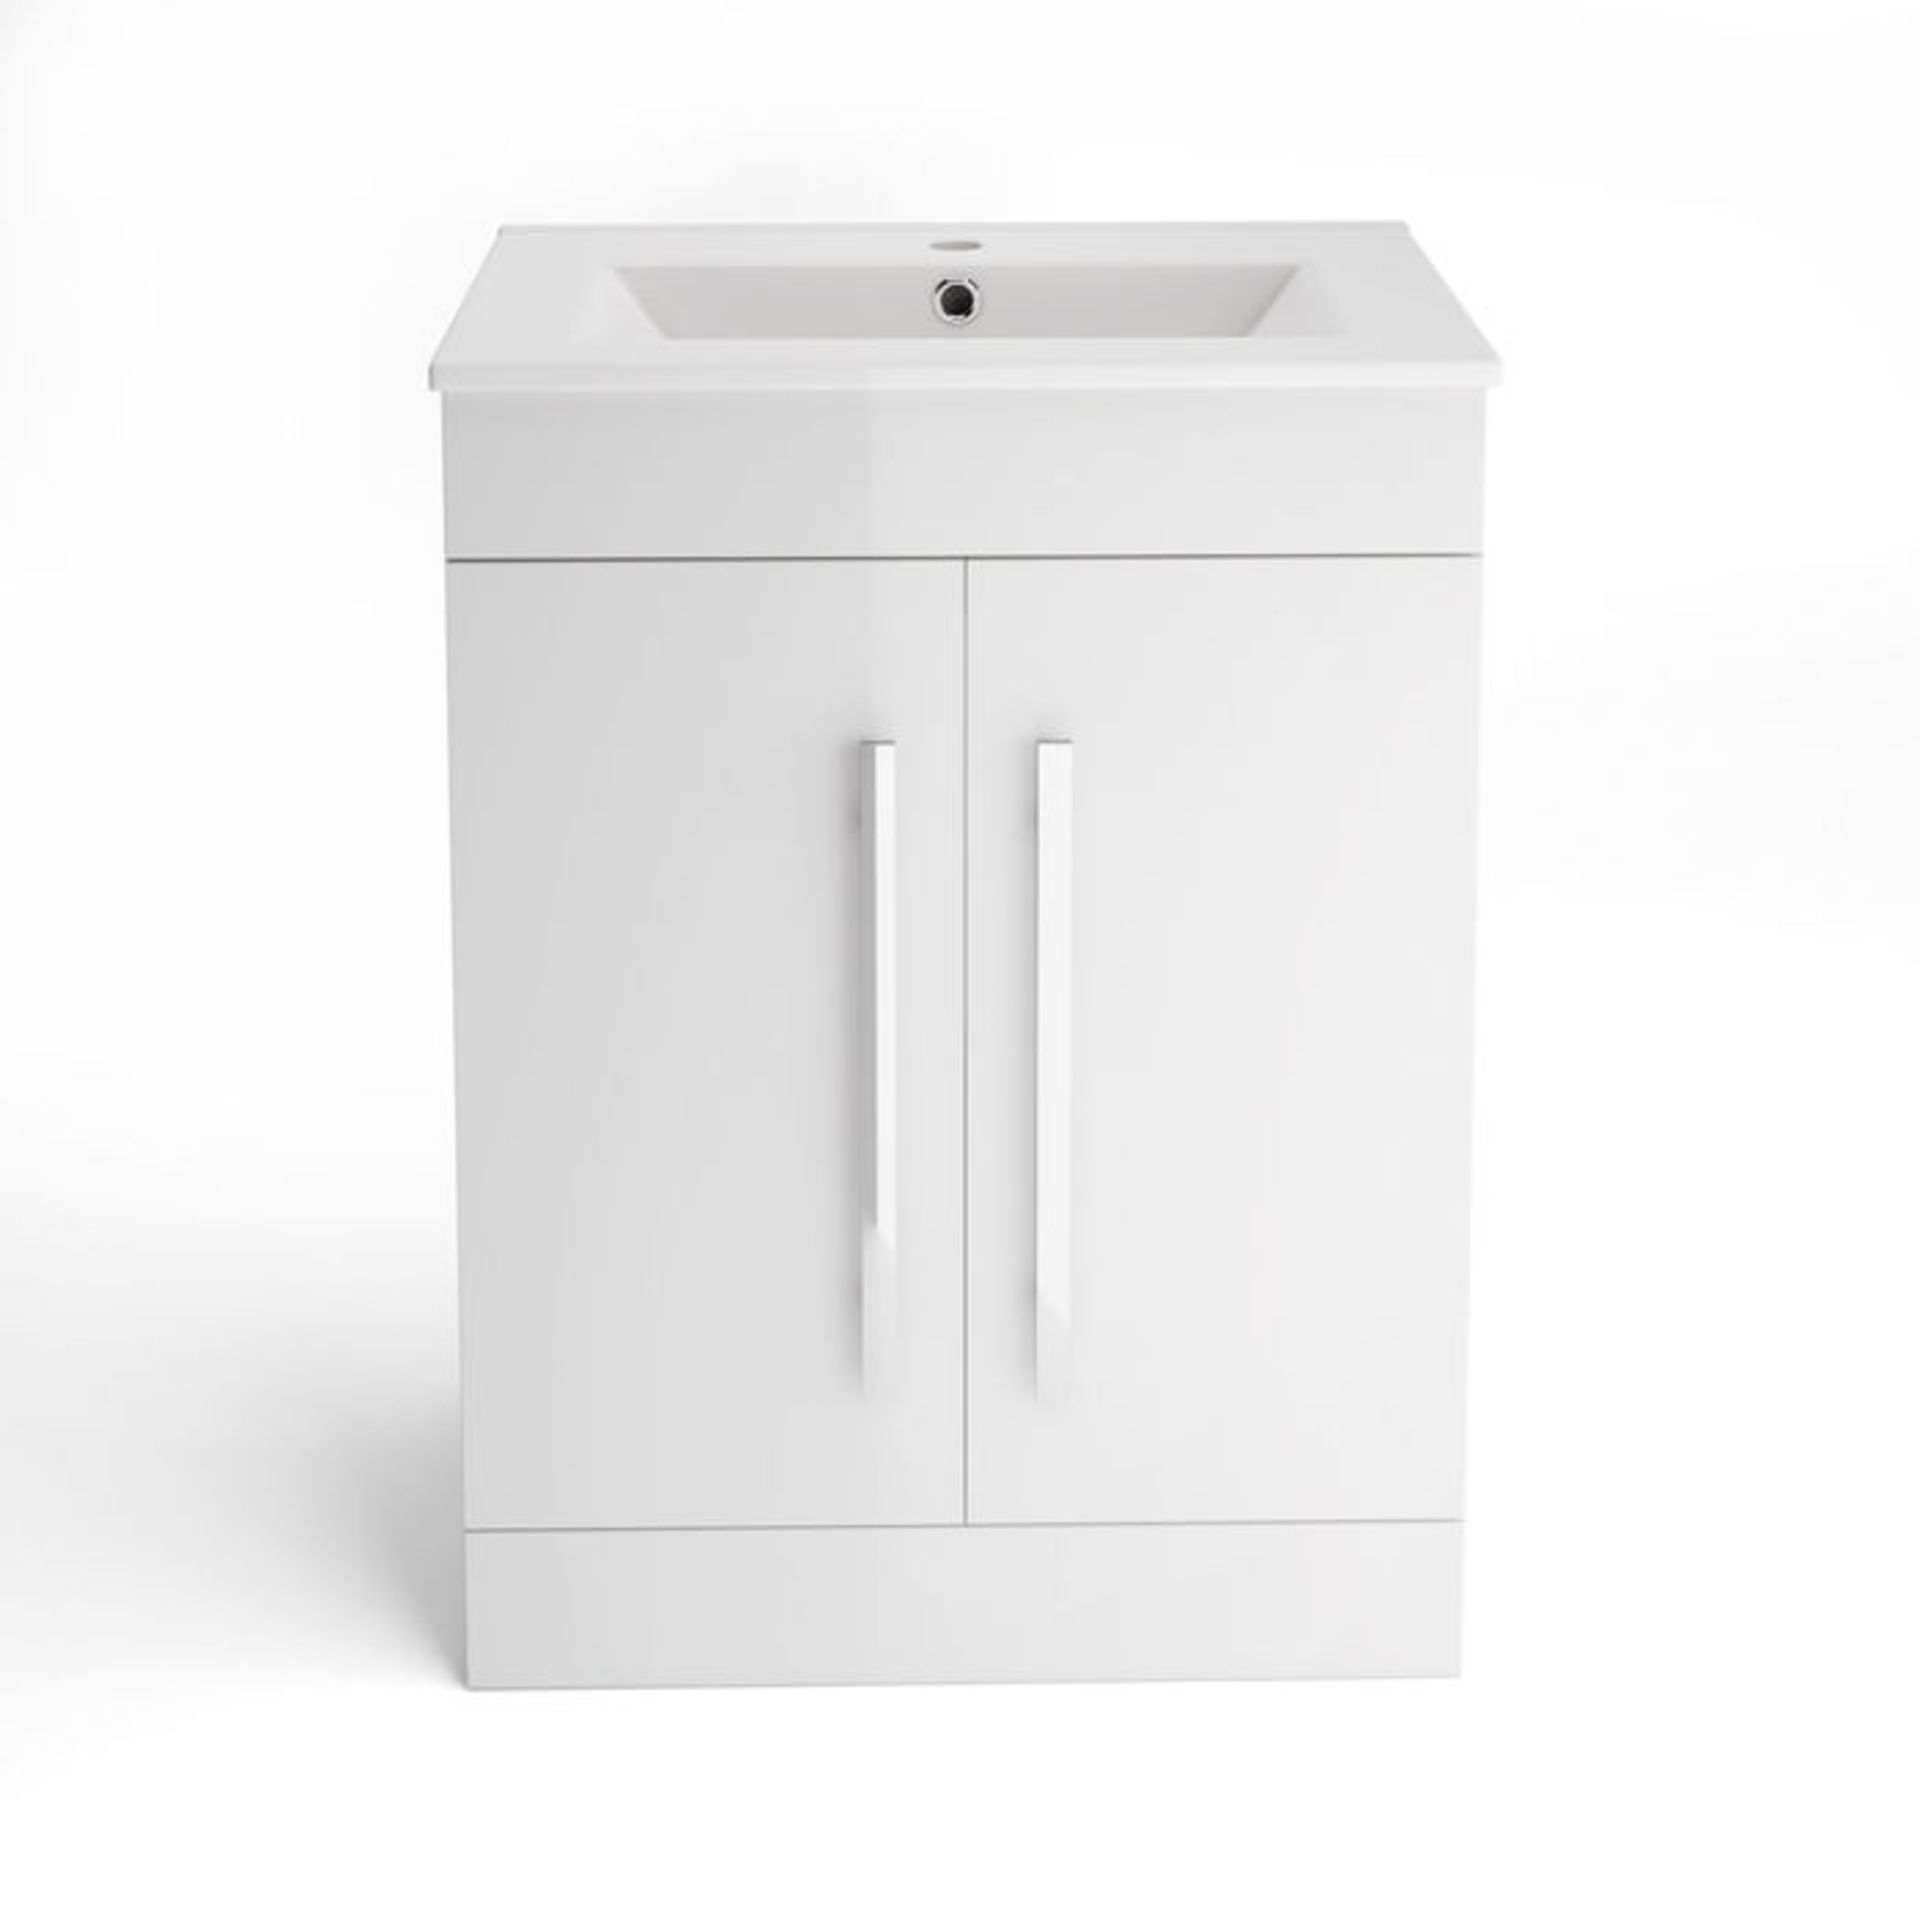 (JM29) 600mm Avon High Gloss White Basin Cabinet - Floor Standing. RRP £499.99. Comes complete - Image 4 of 5